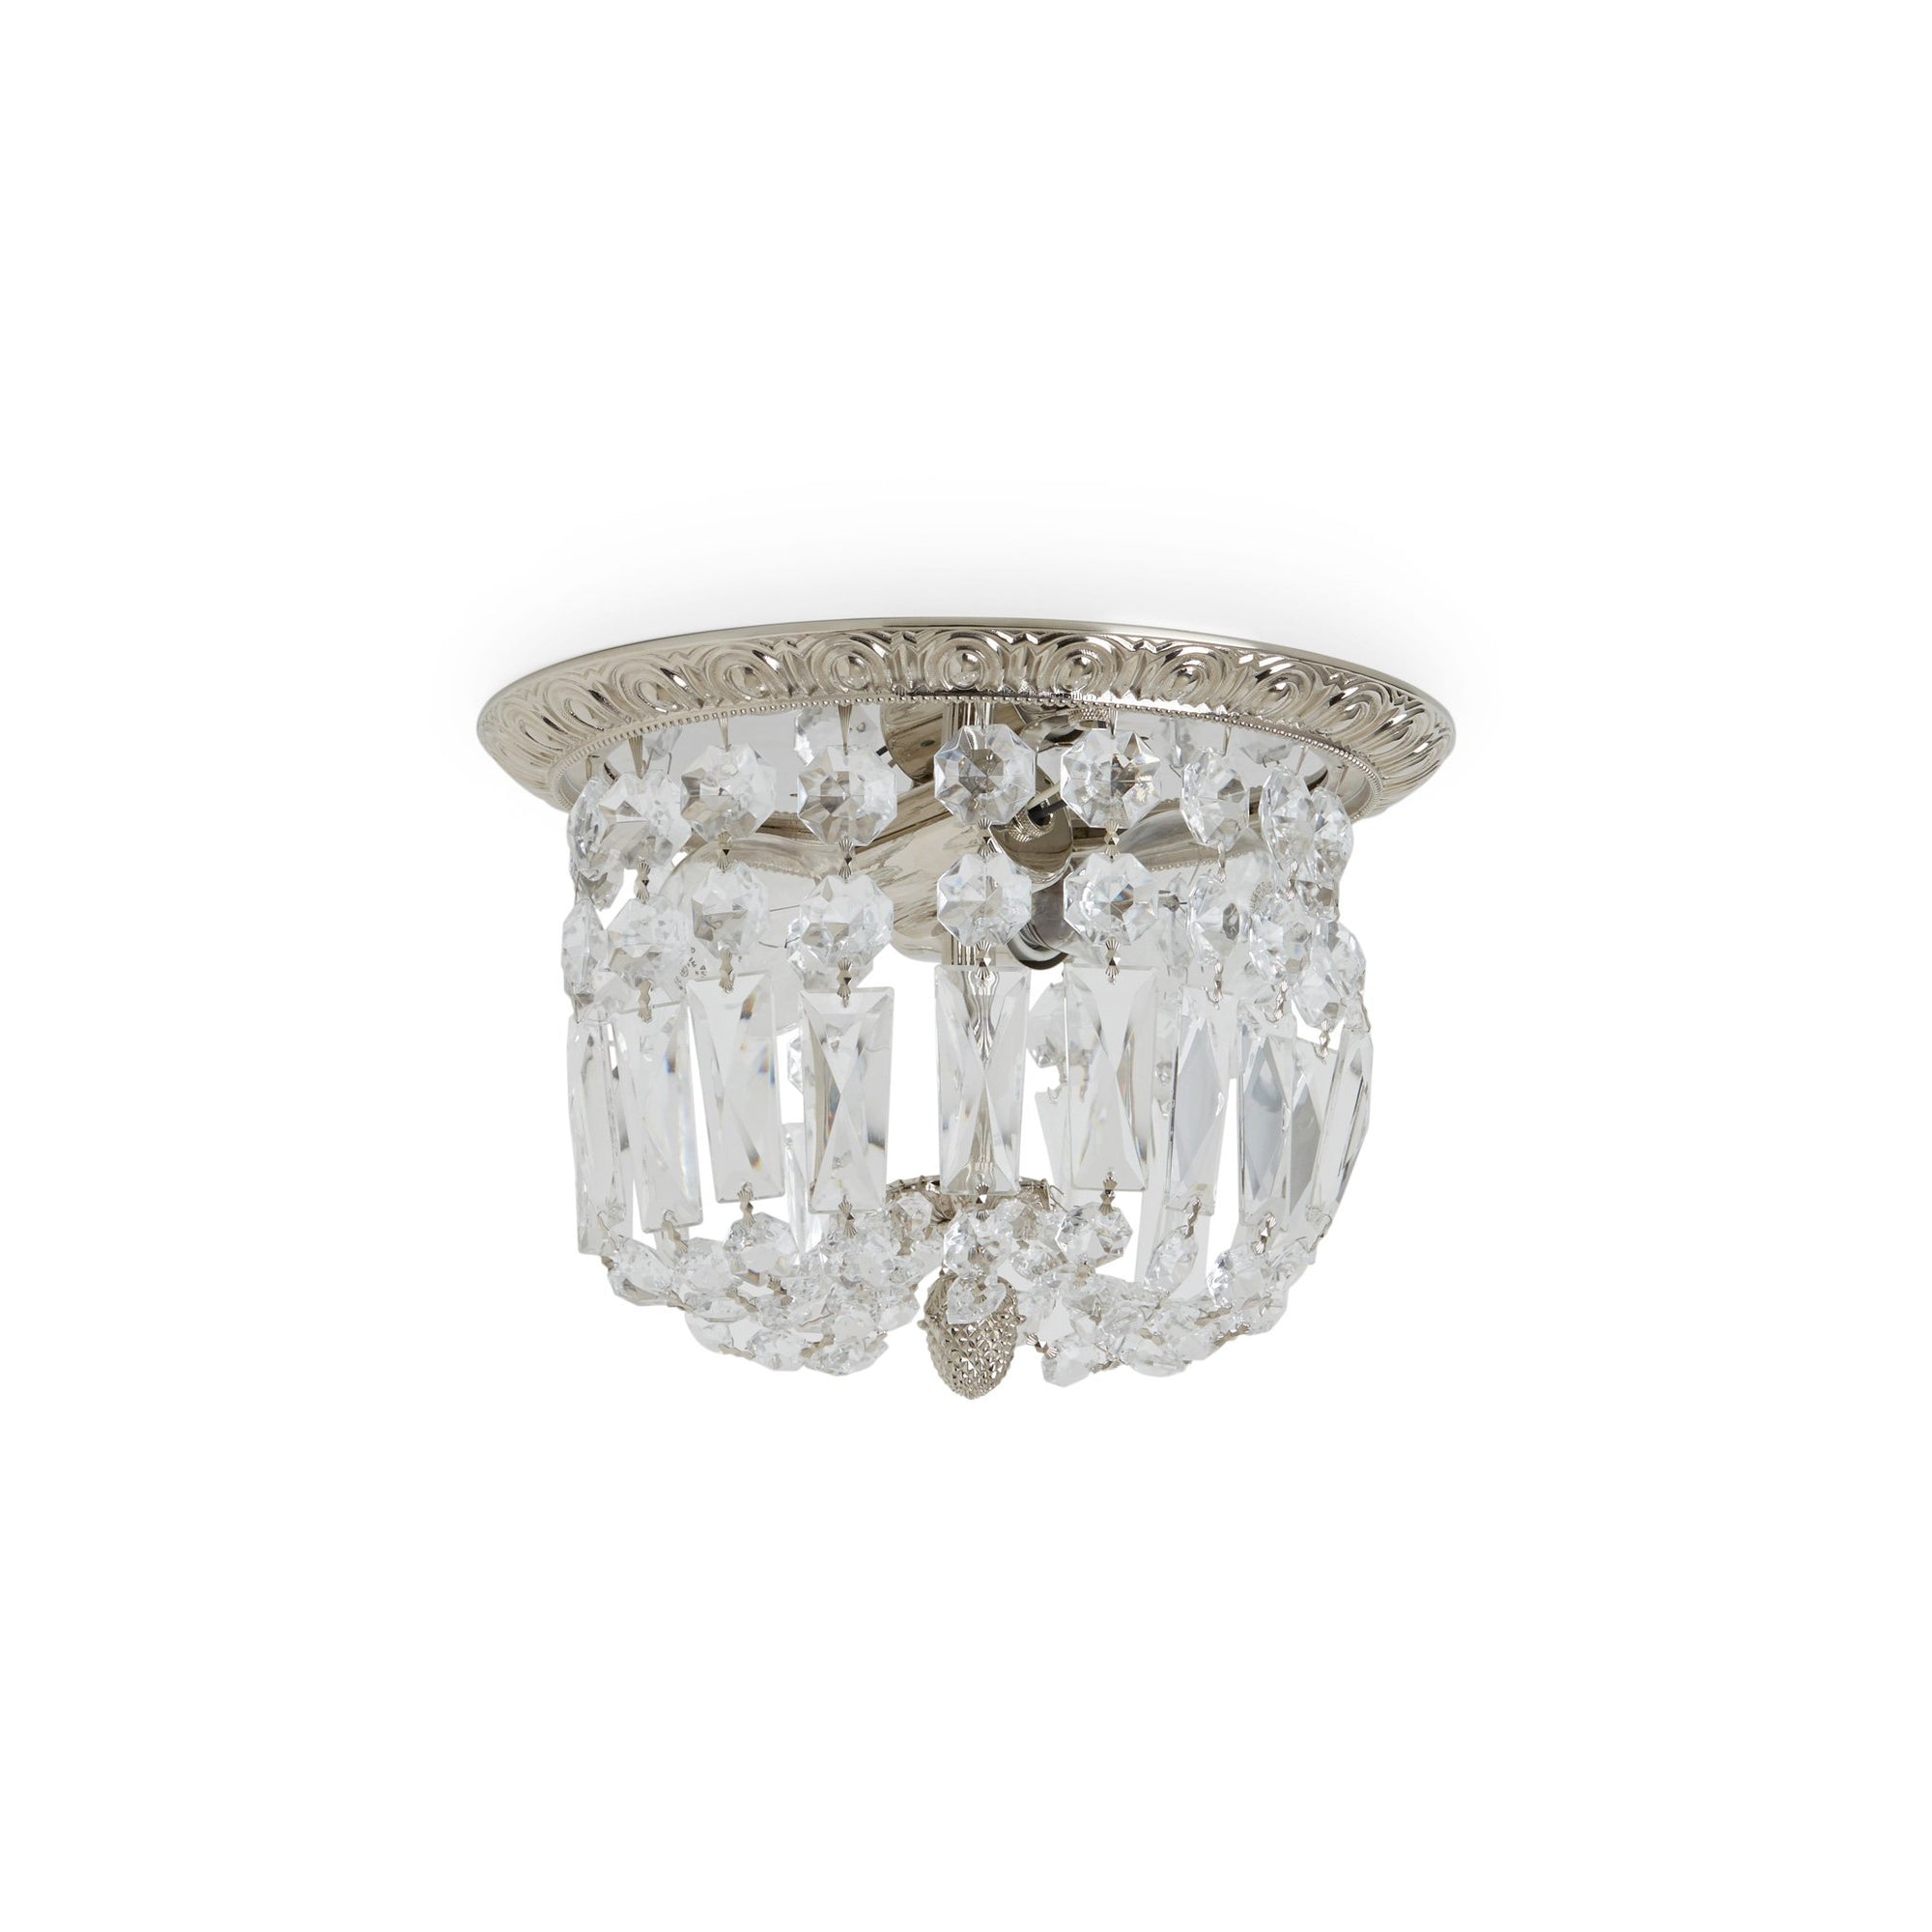 7131-DRPD-PN Sherle Wagner International Egg & Dart Ceiling Light Light with Draped Crystals in Gold plate metal finish